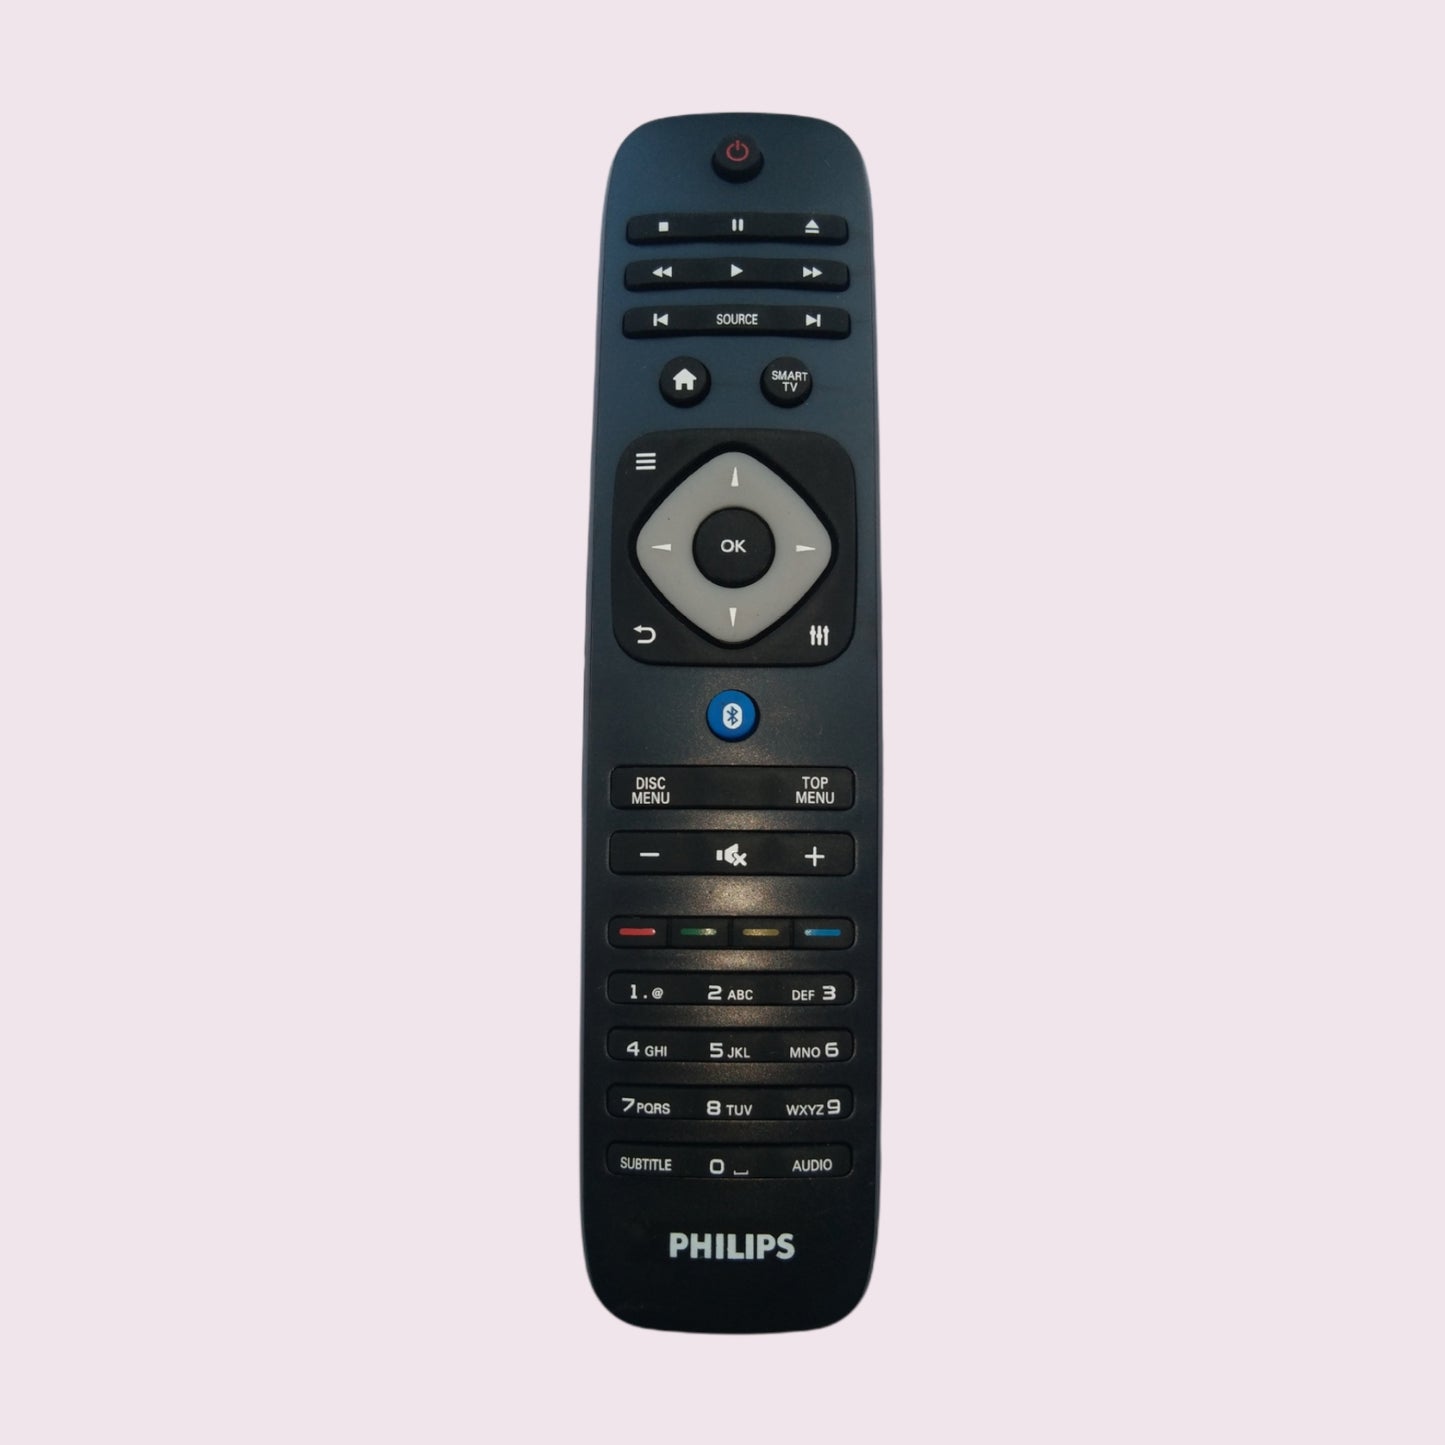 Philiphs smart TV remote control with Bluetooth option